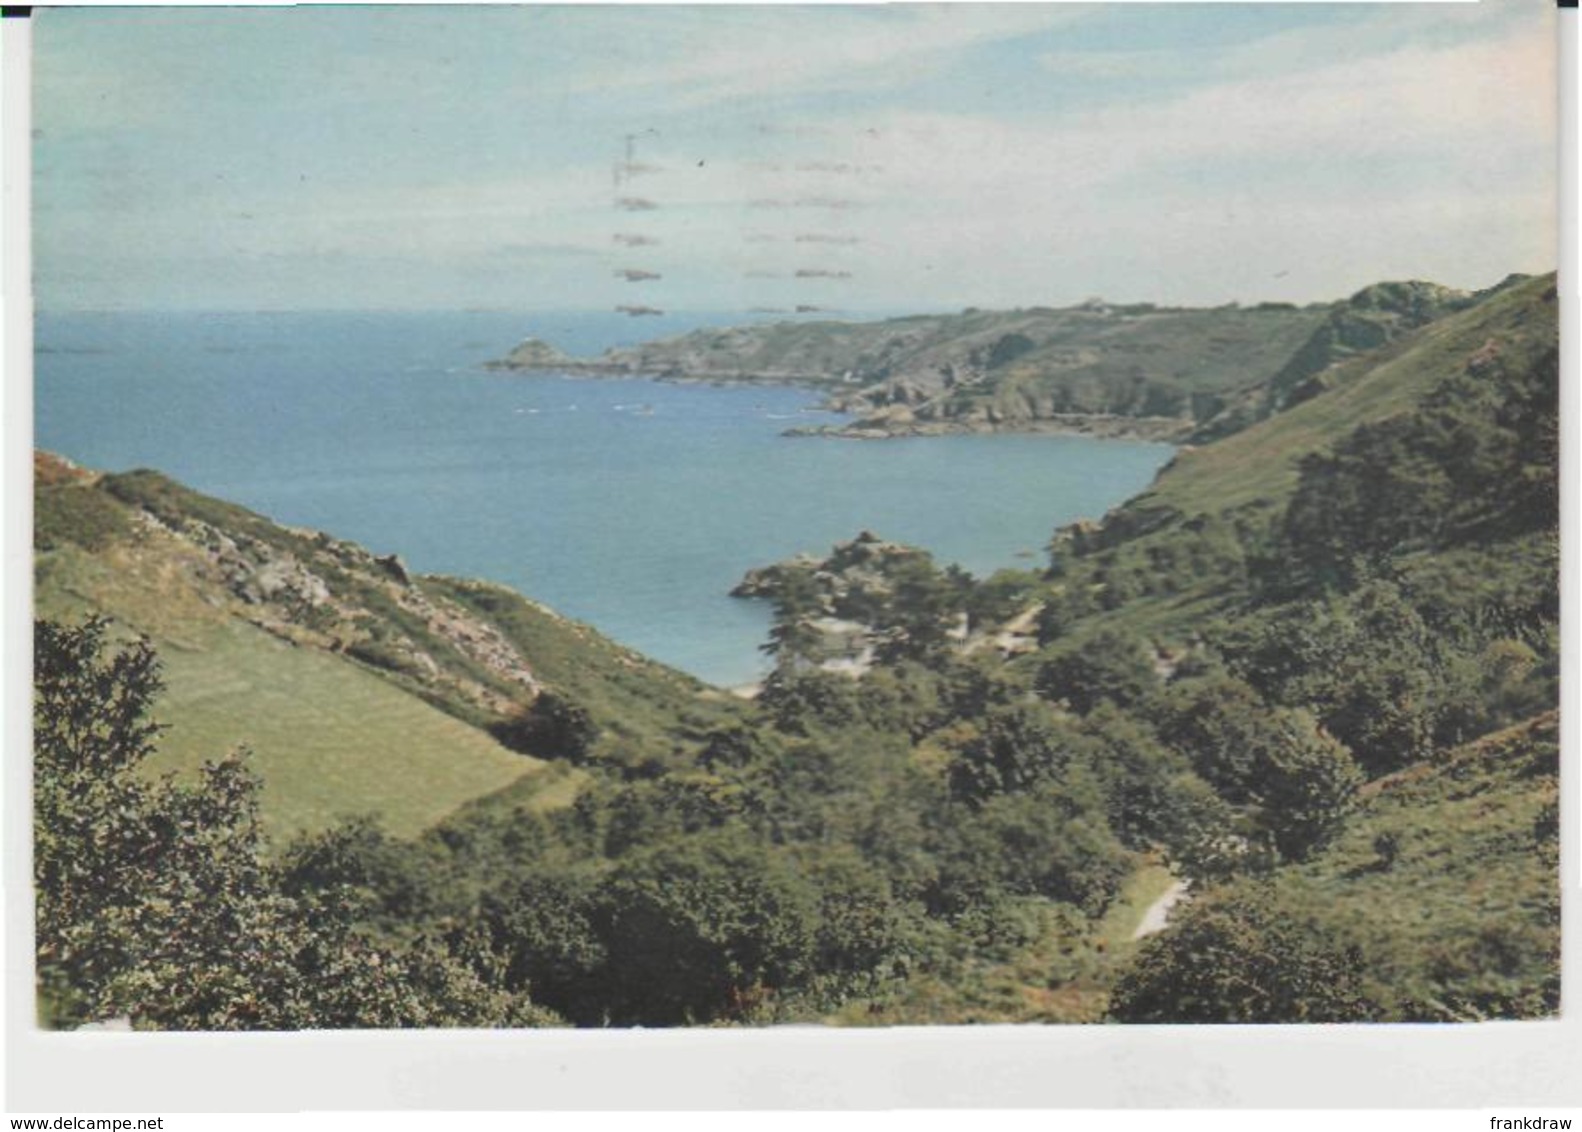 Postcard - Bouley Bay, Jersey - Posted 19th Aug 1958  Very Good - Unclassified